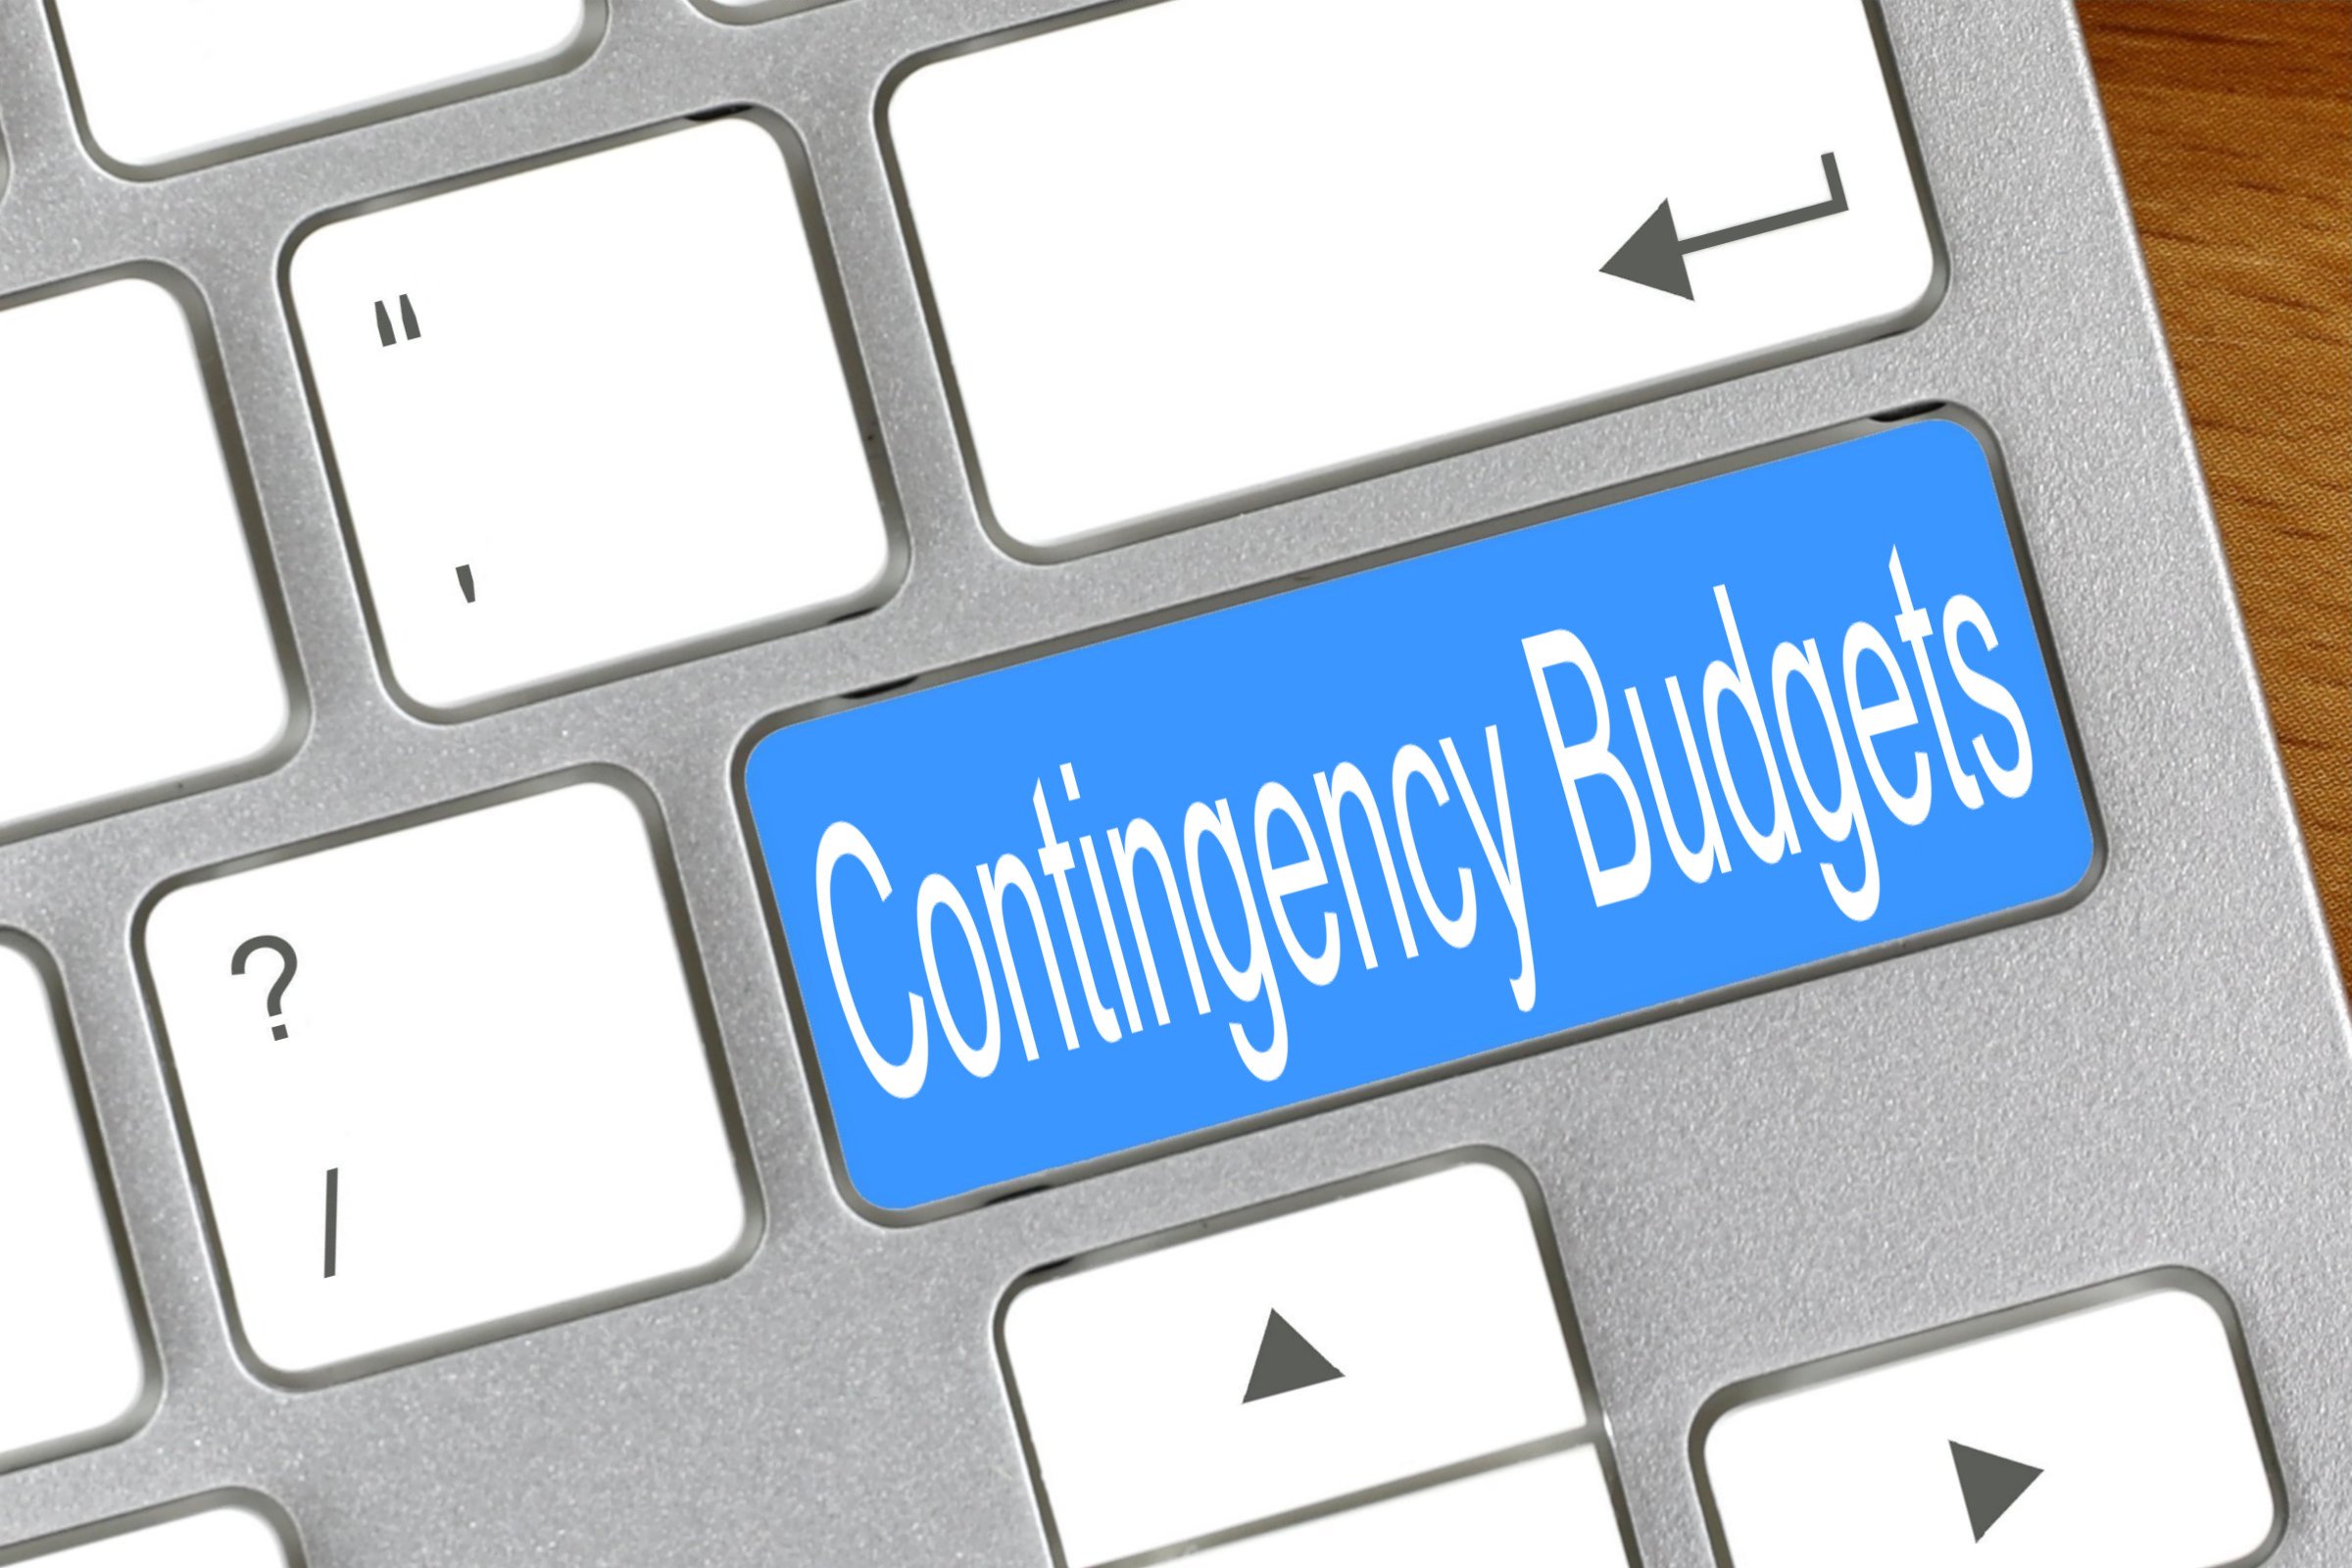 contingency budgets